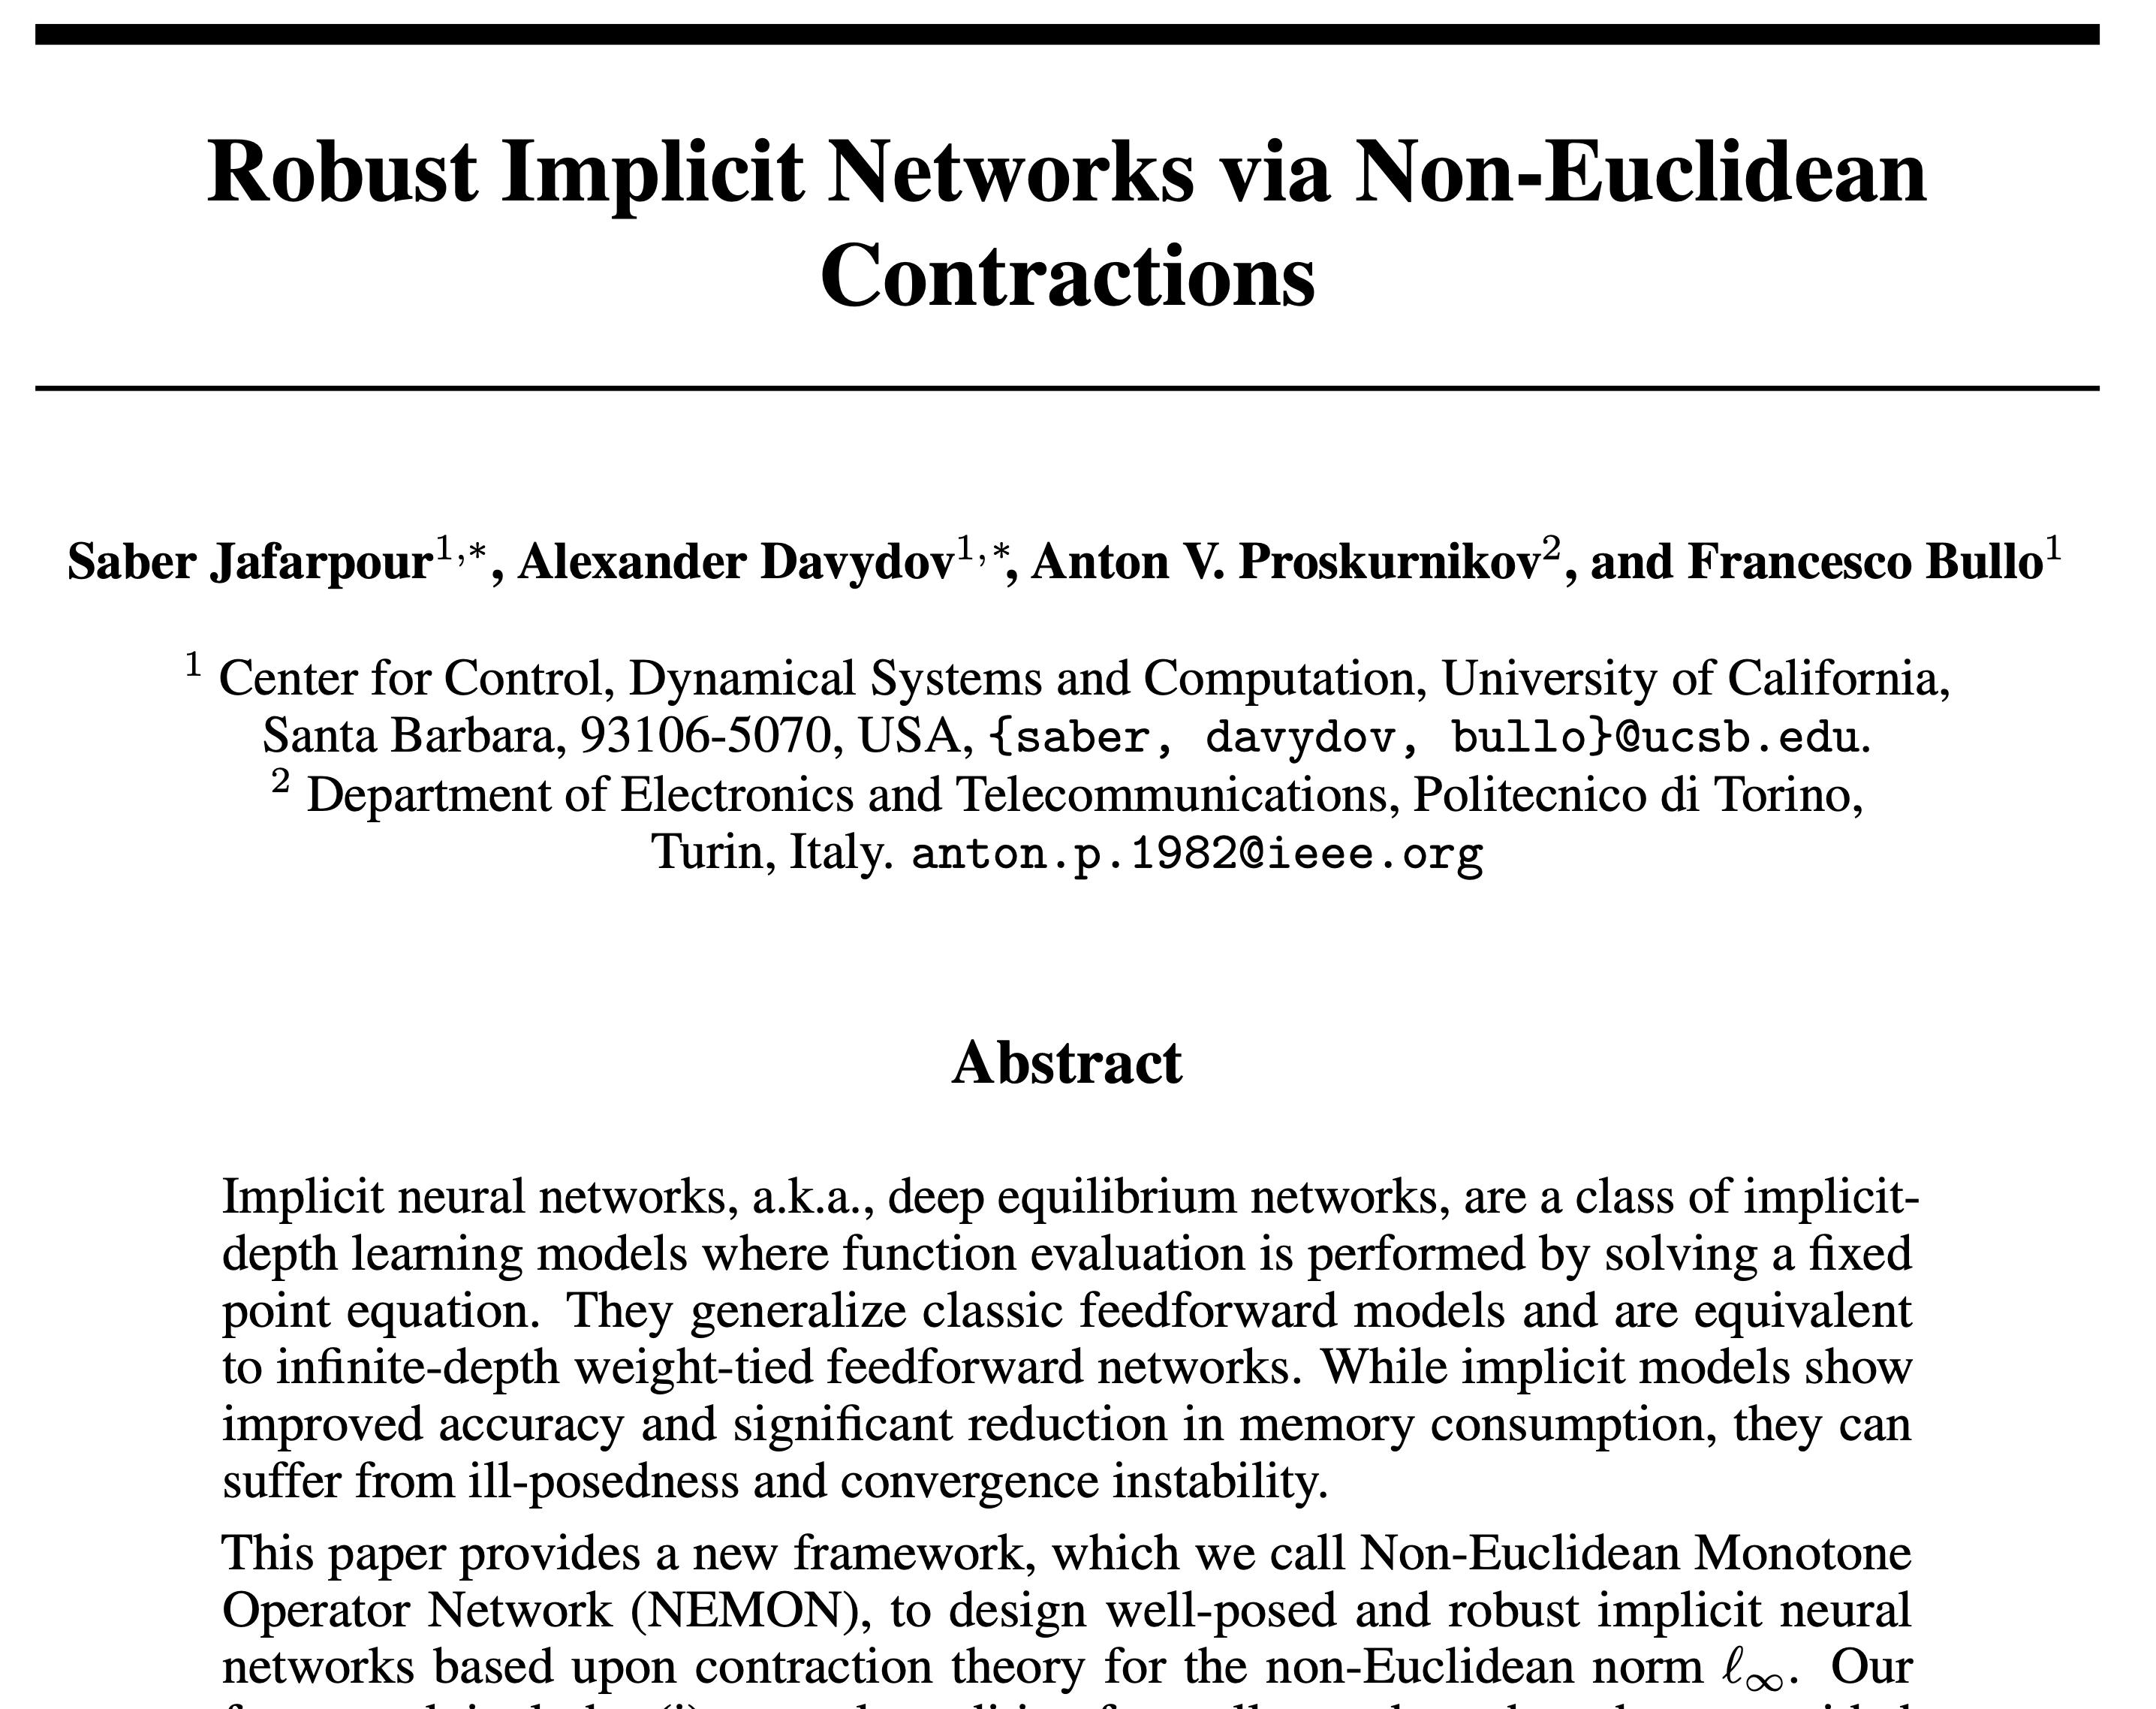 Robust Implicit Networks Article